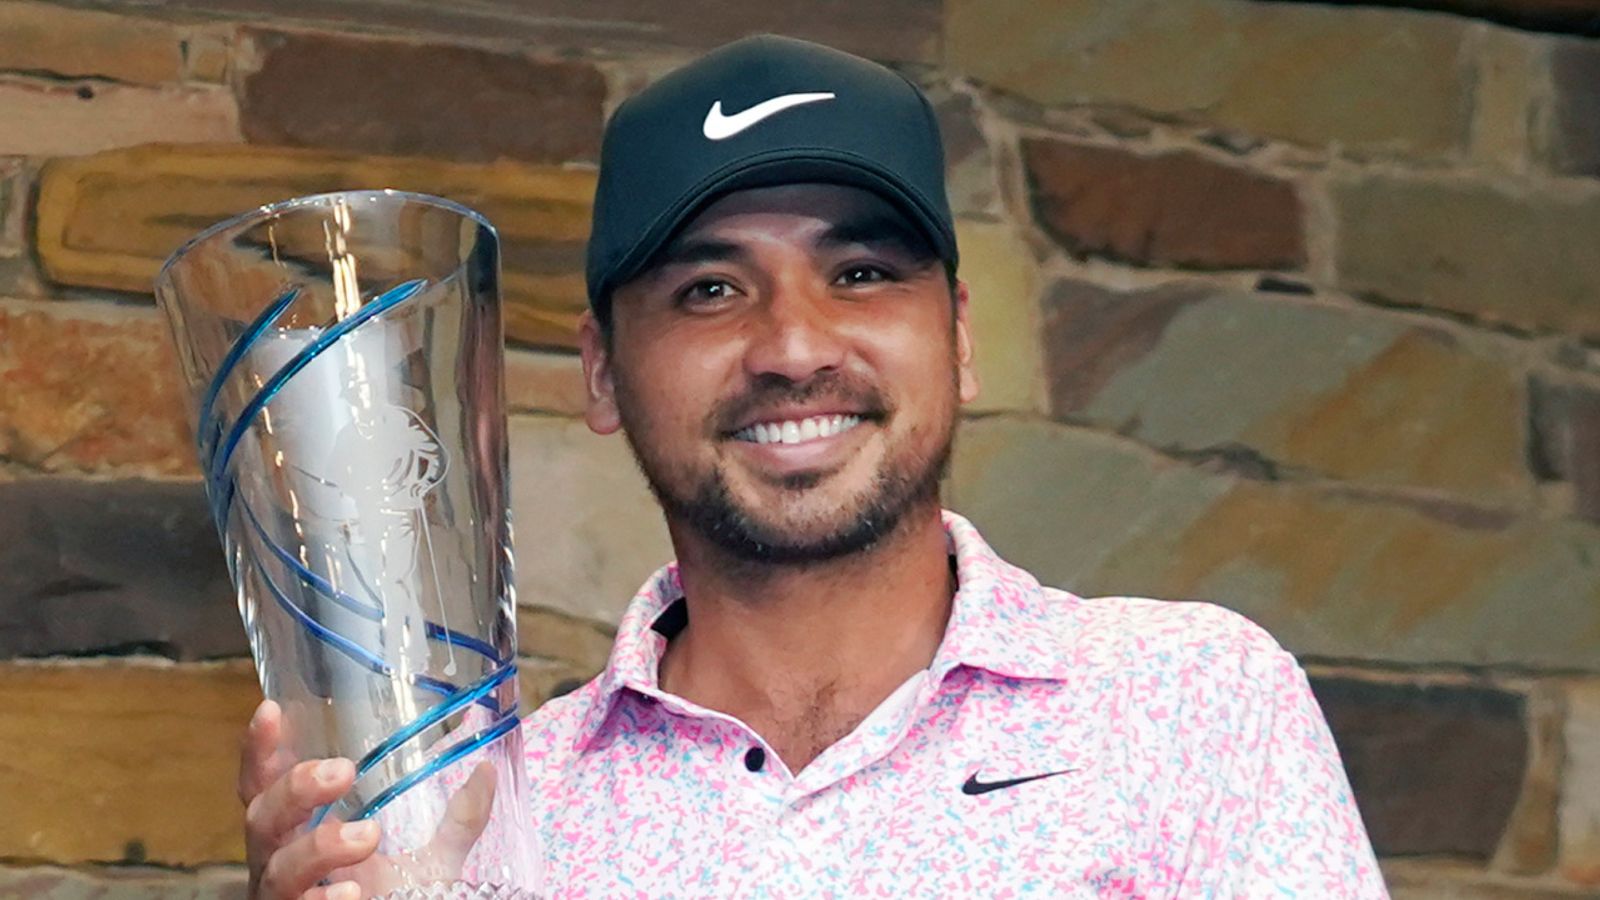 AT&T Byron Nelson: Jason Day claims first PGA Tour title in five years with stunning nine-under final round